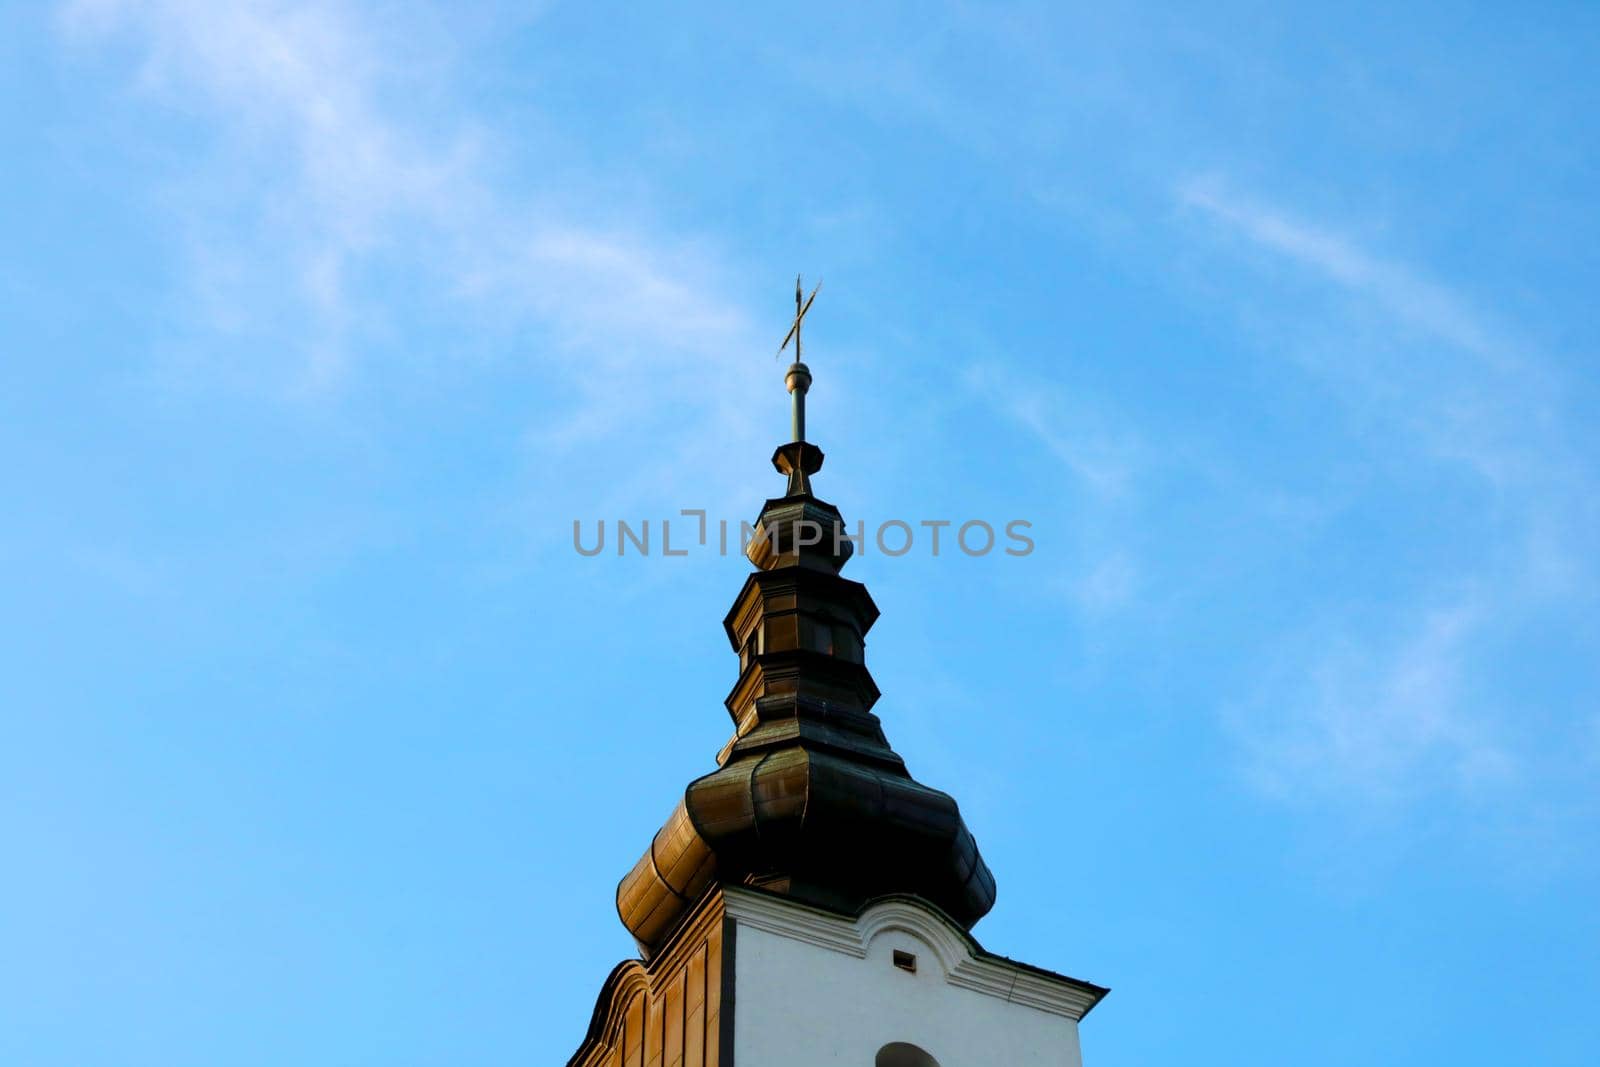 The old dome of the church against the blue sky